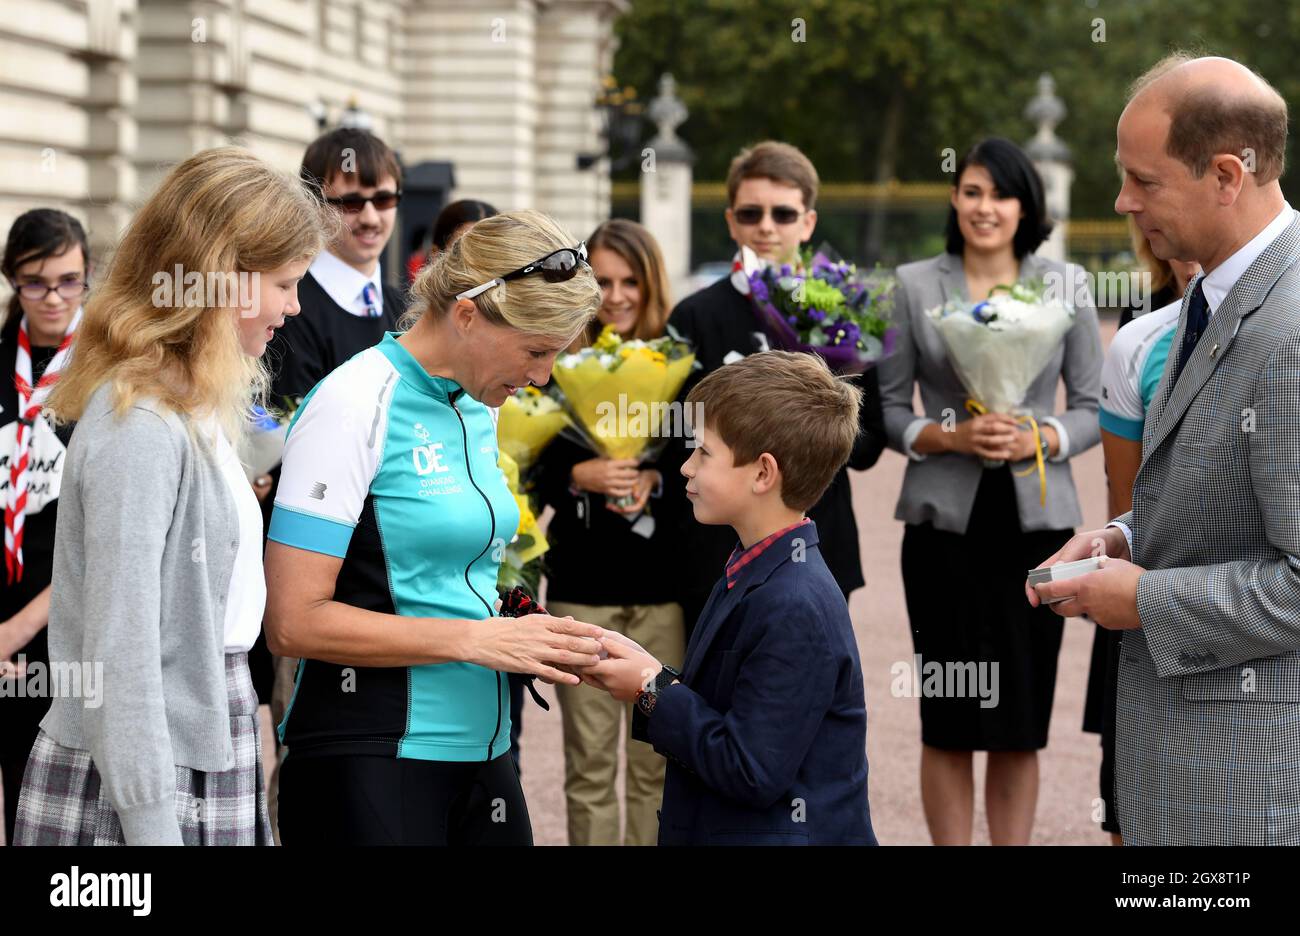 Sophie, Countess of Wessex is greeted by her family, Prince Edward, Earl of Wessex, Lady Louise Windsor  and James, Viscount Severn, as she arrives at Buckingham Palace to complete her bike ride from Edinburgh to London in support of The Duke of Edinburgh's Award on September 25, 2016. Stock Photo